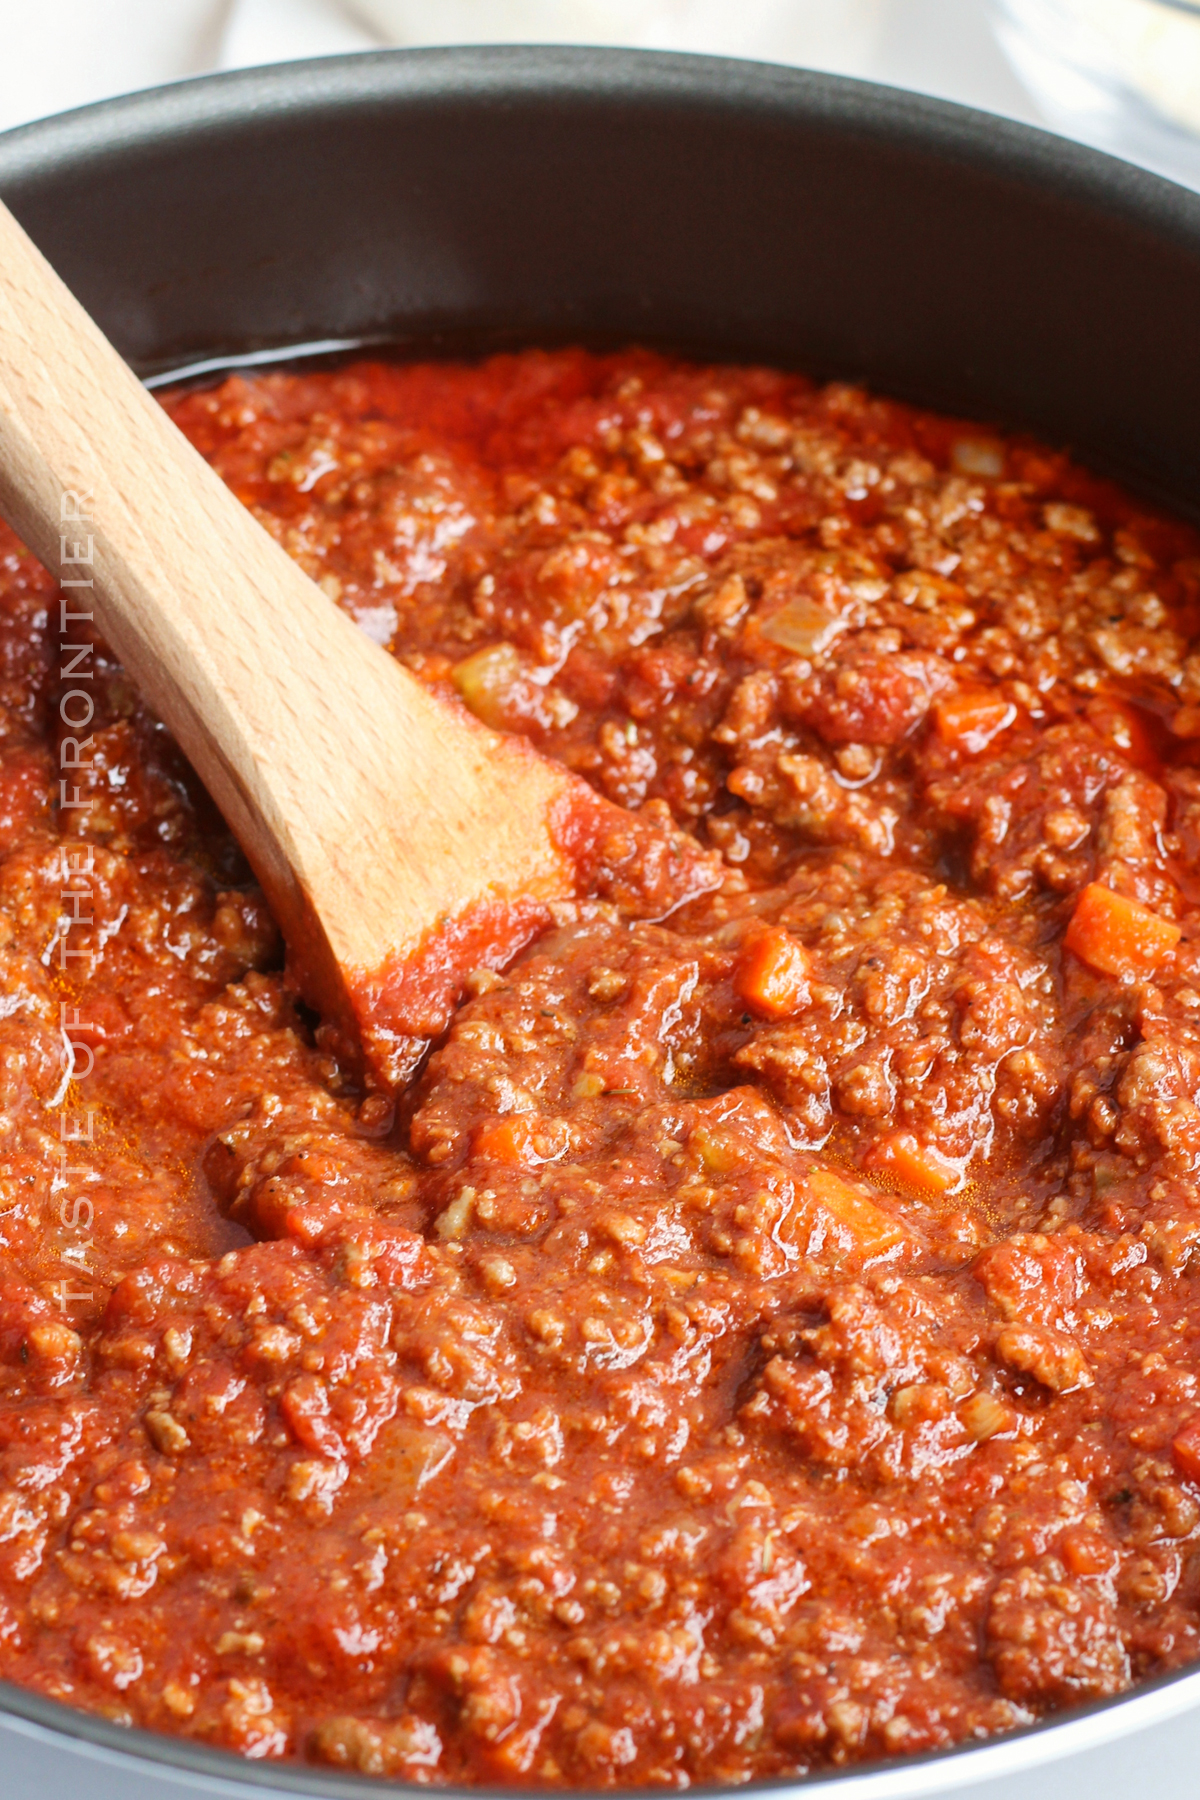 Recipe for One-Pot Bolognese